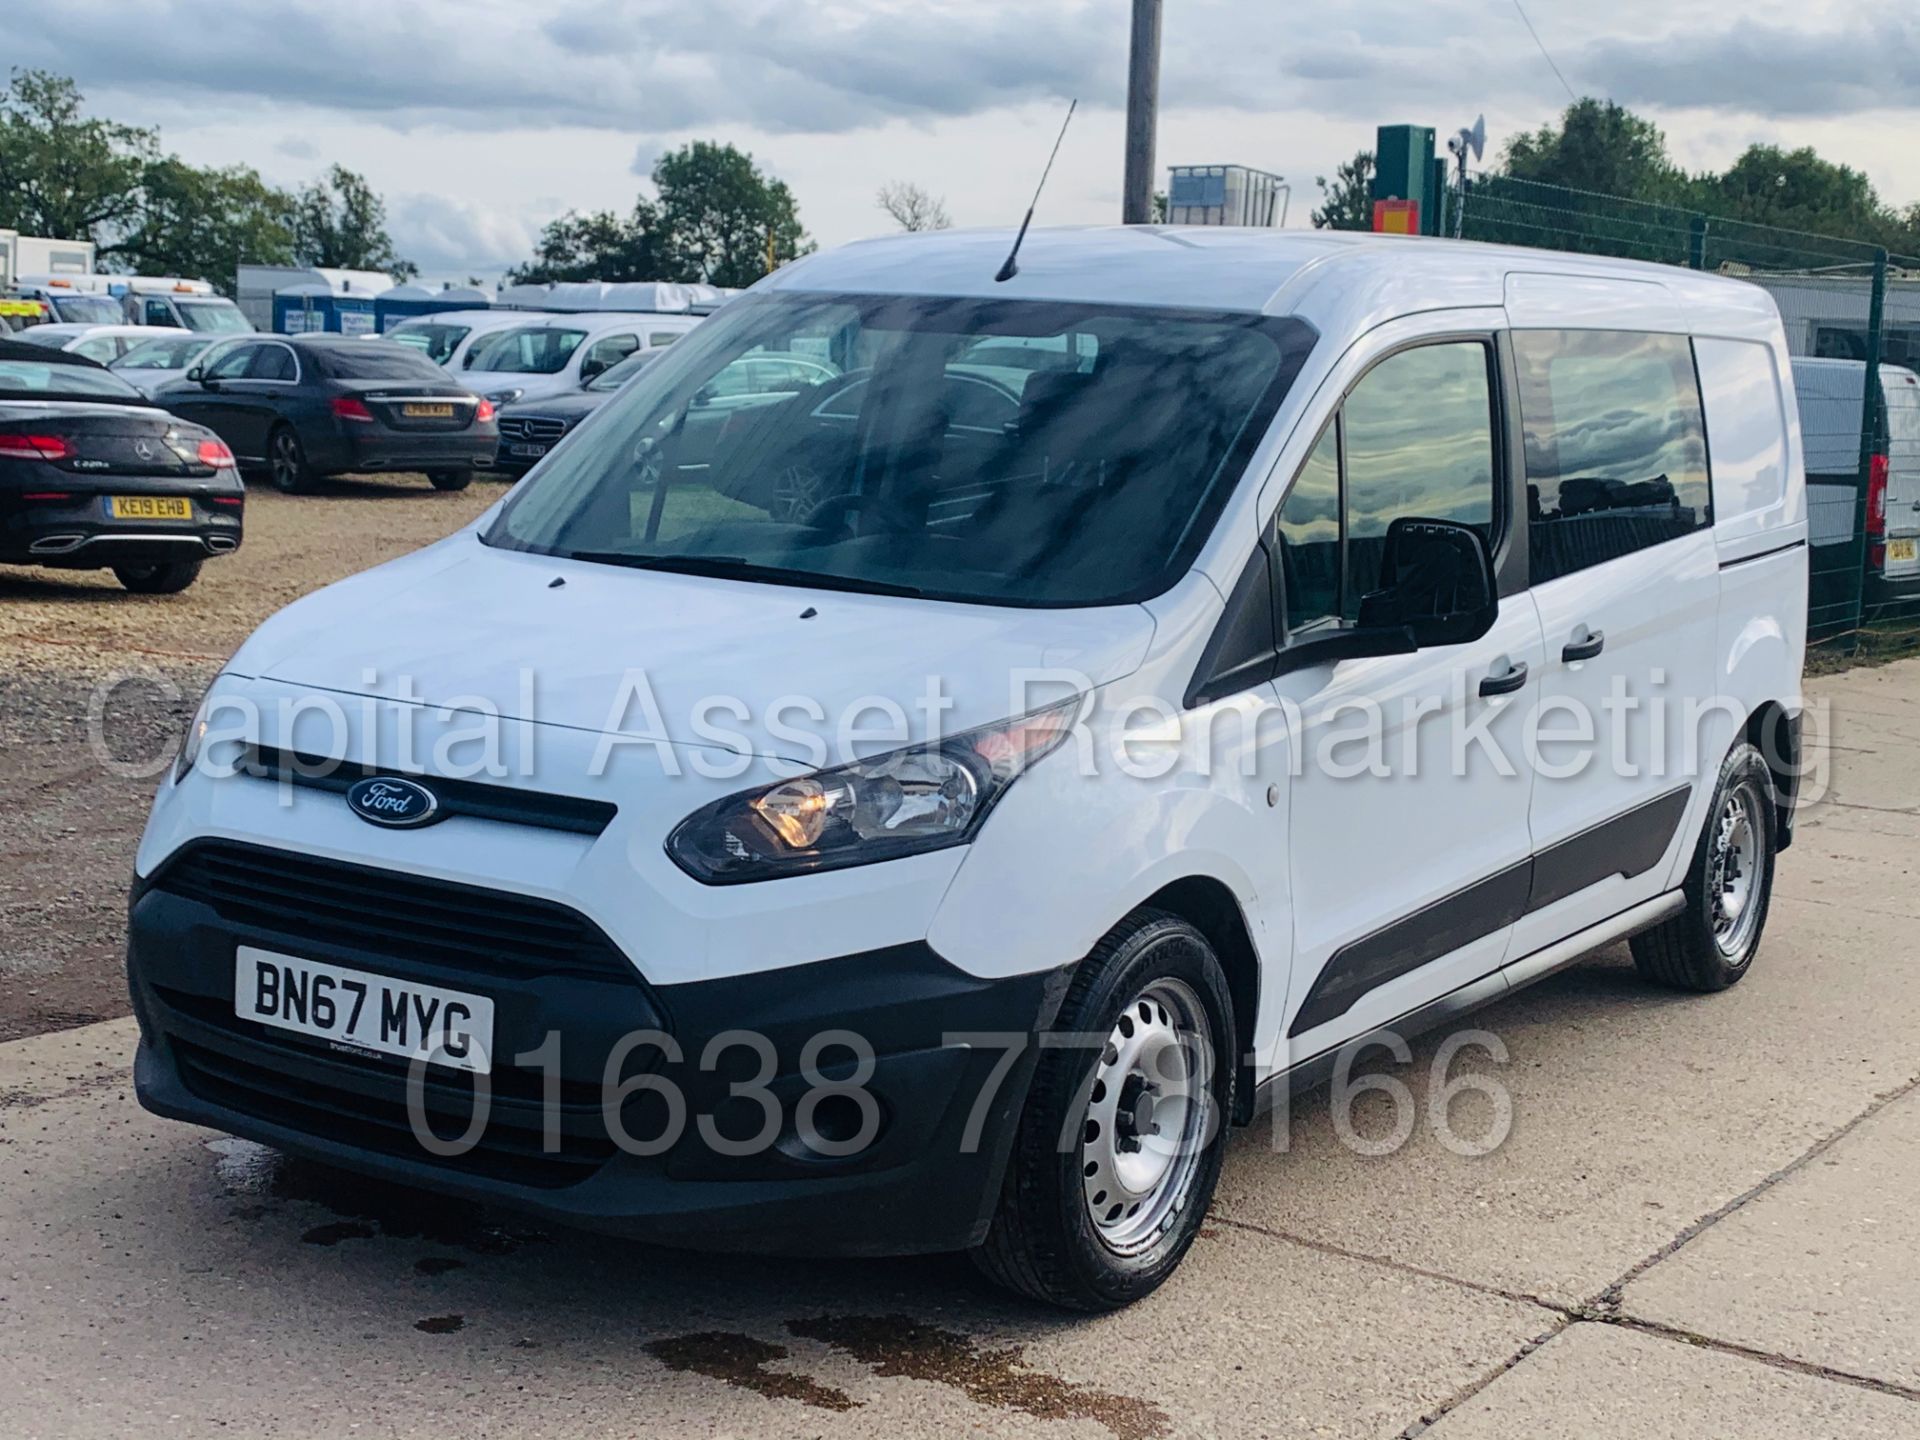 (ON SALE) FORD TRANSIT CONNECT *LWB- 5 SEATER CREW VAN* (2018 - EURO 6) 1.5 TDCI *AIR CON* (1 OWNER) - Image 2 of 40